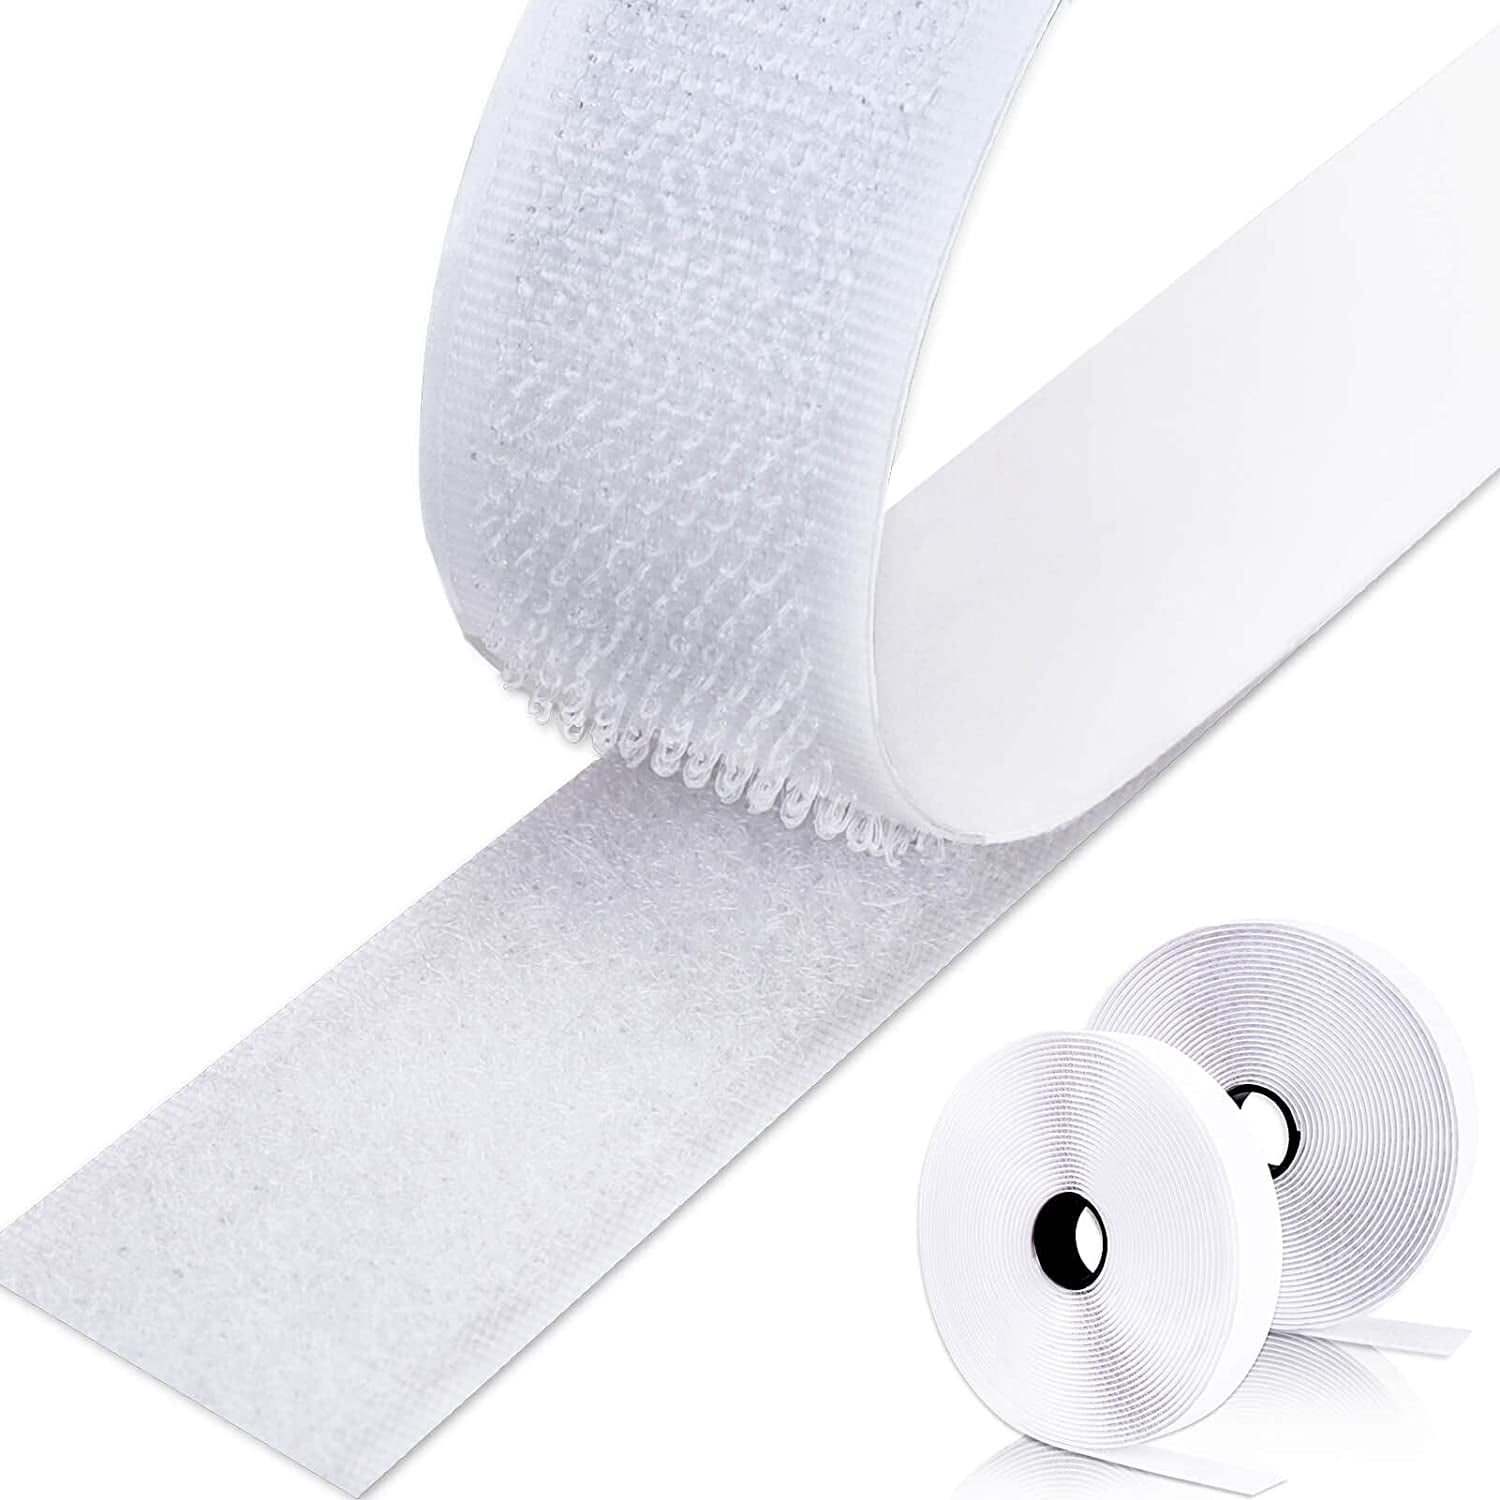 Boghandel Grøn Solrig Mcury 8M Double Sided Self Adhesive Scratch Strip, Adhesive Scratch Strip  Self Adhesive Velcro Tape for Wall Hangings Carpets 20mm (White) -  Walmart.com